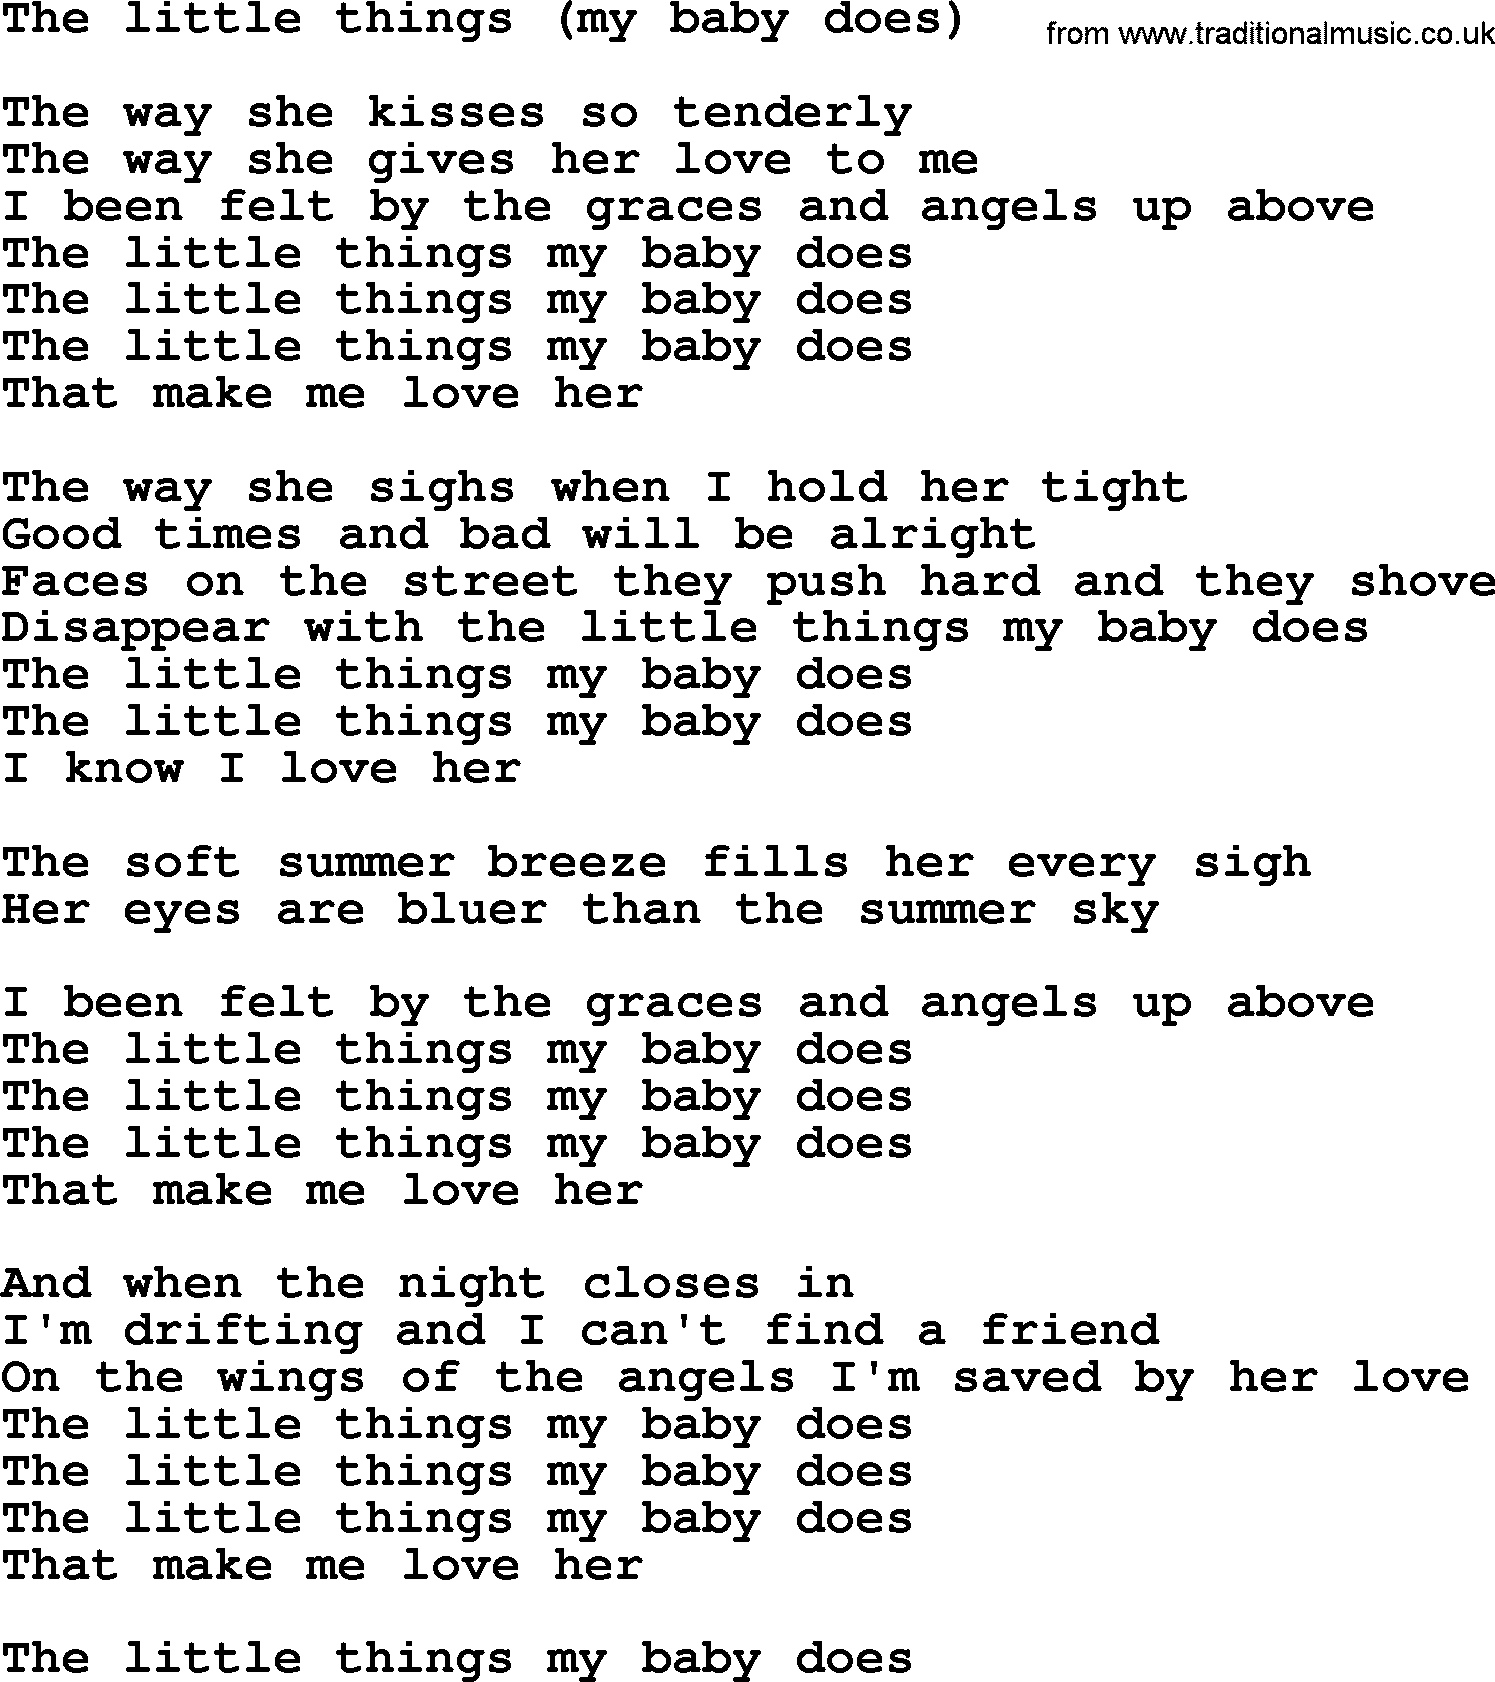 Bruce Springsteen song: The Little Things(My Baby Does) lyrics